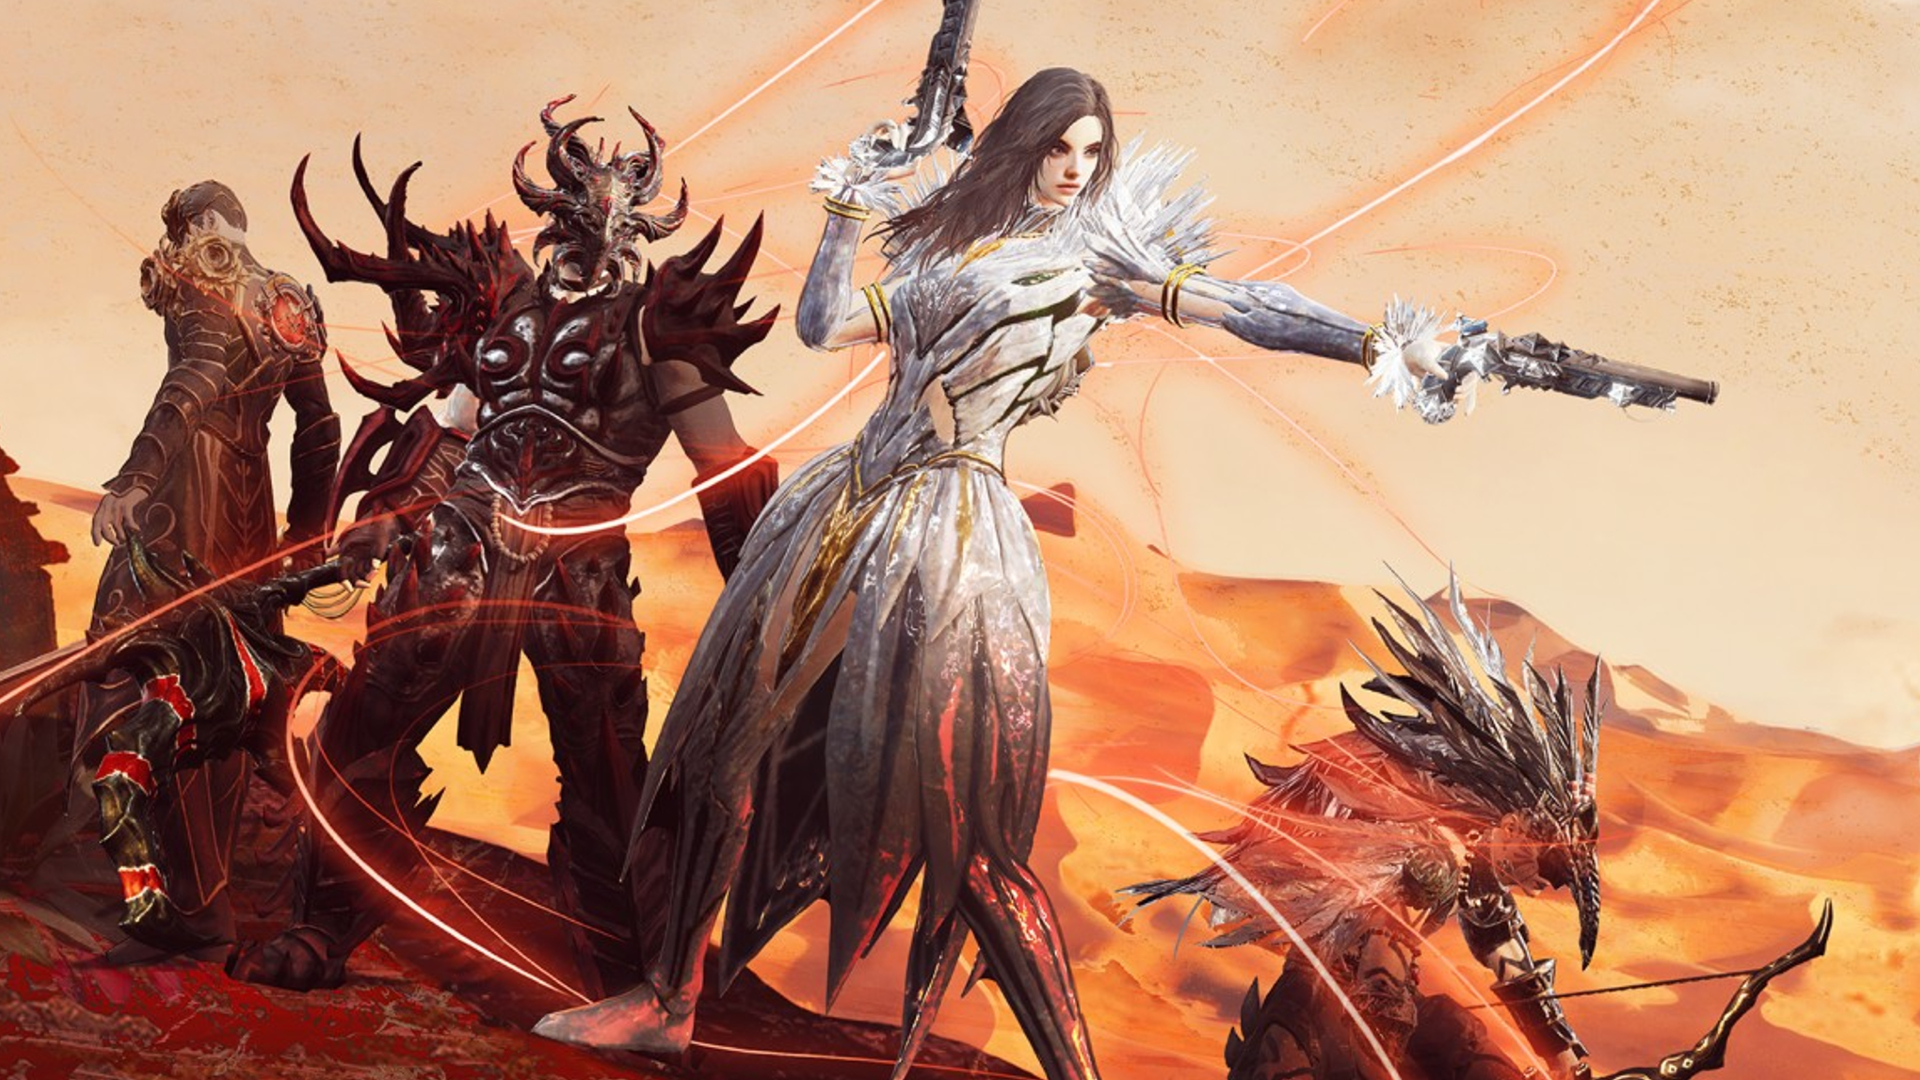 Four people in armour stand atop a desert landscape. The far left one faces away from camera in black armour, a barbarian with their face covered by a mask stands next to them. A female with medium-length brown hair and white shimmering armour duel wields guns, one held up and one pointing out to her right. Below her outstretched gun an archer crouches, their face obscured by an elaborate headdress.